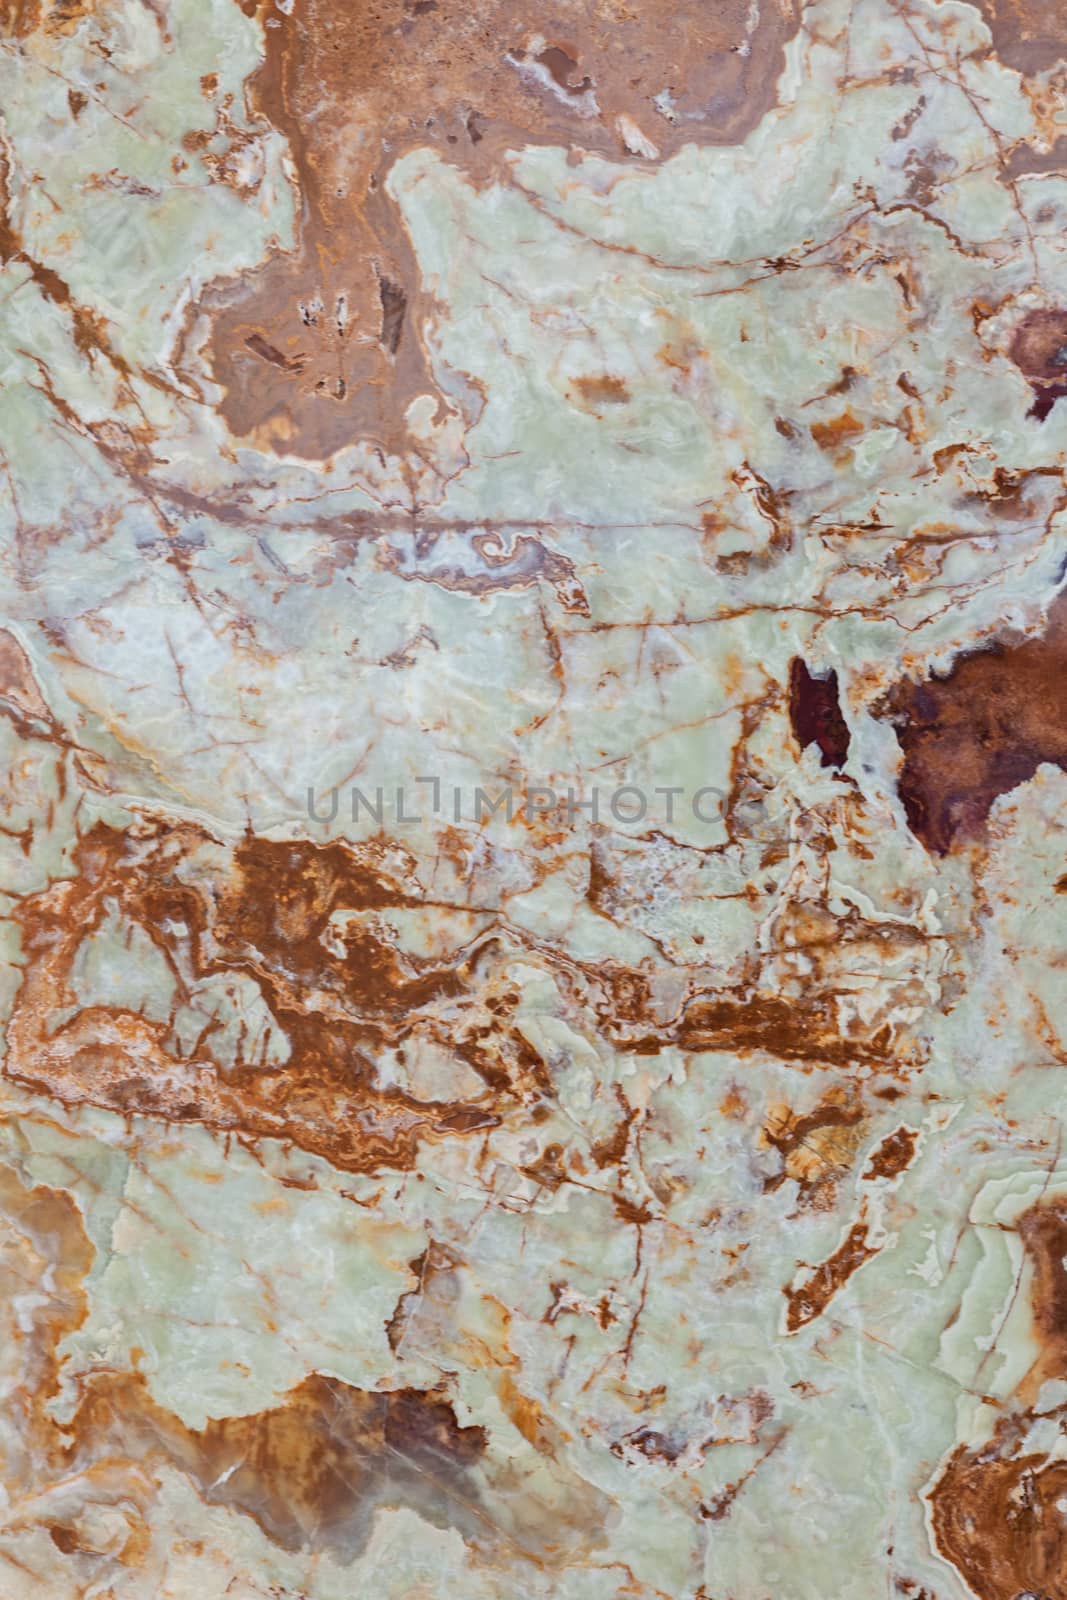 brown and white marble floor like a background, note shallow depth of field